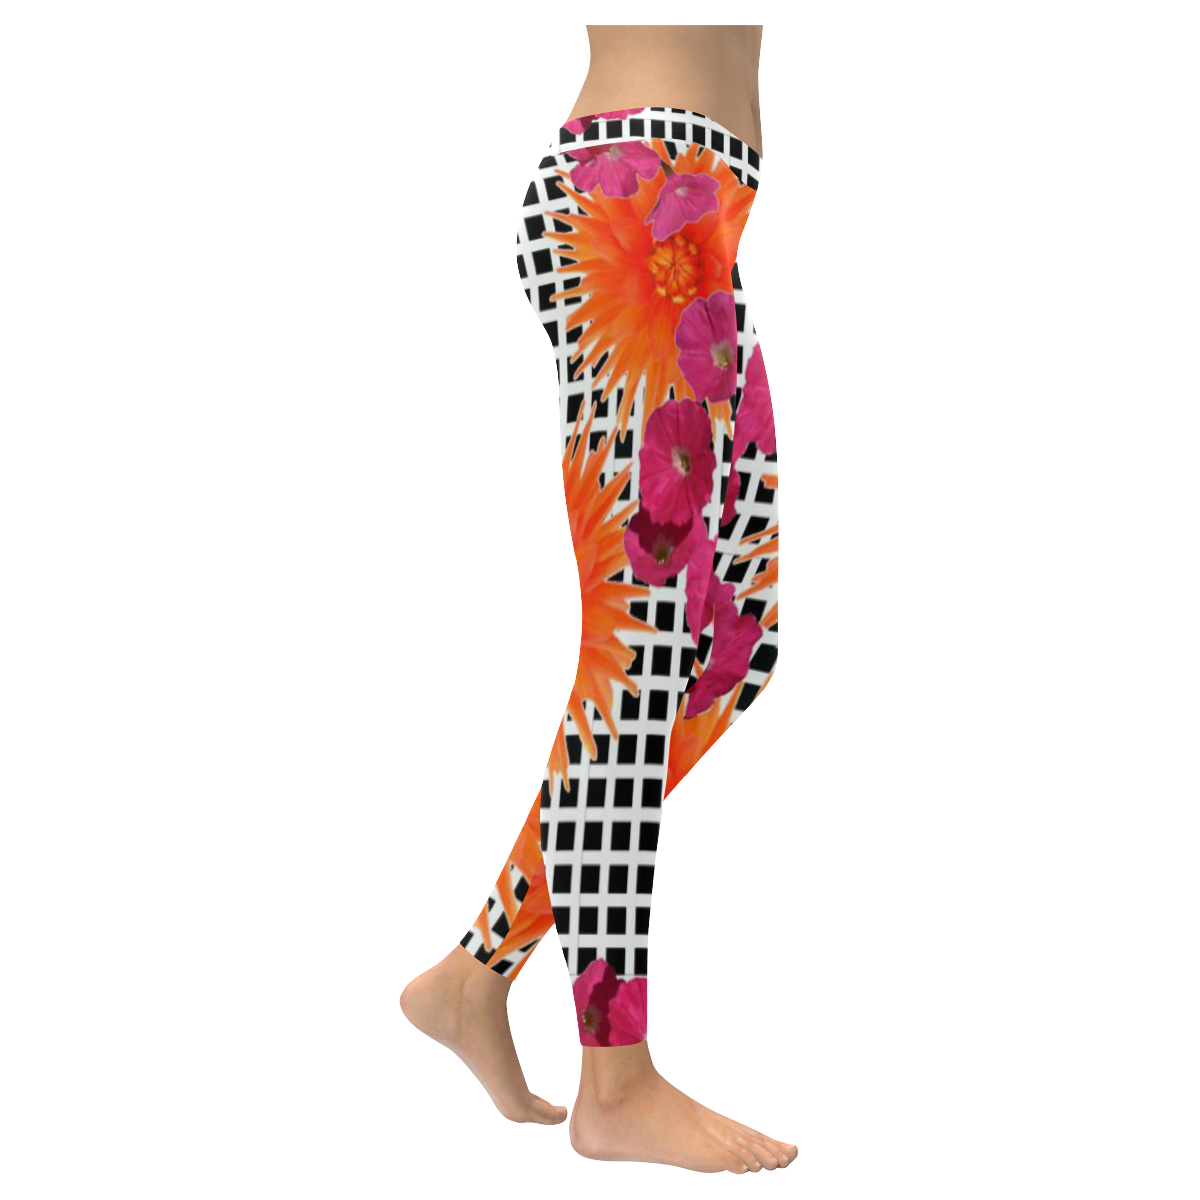 Leggings Black White Check Orange Pink Flowers by Tell3People Women's Low Rise Leggings (Invisible Stitch) (Model L05)